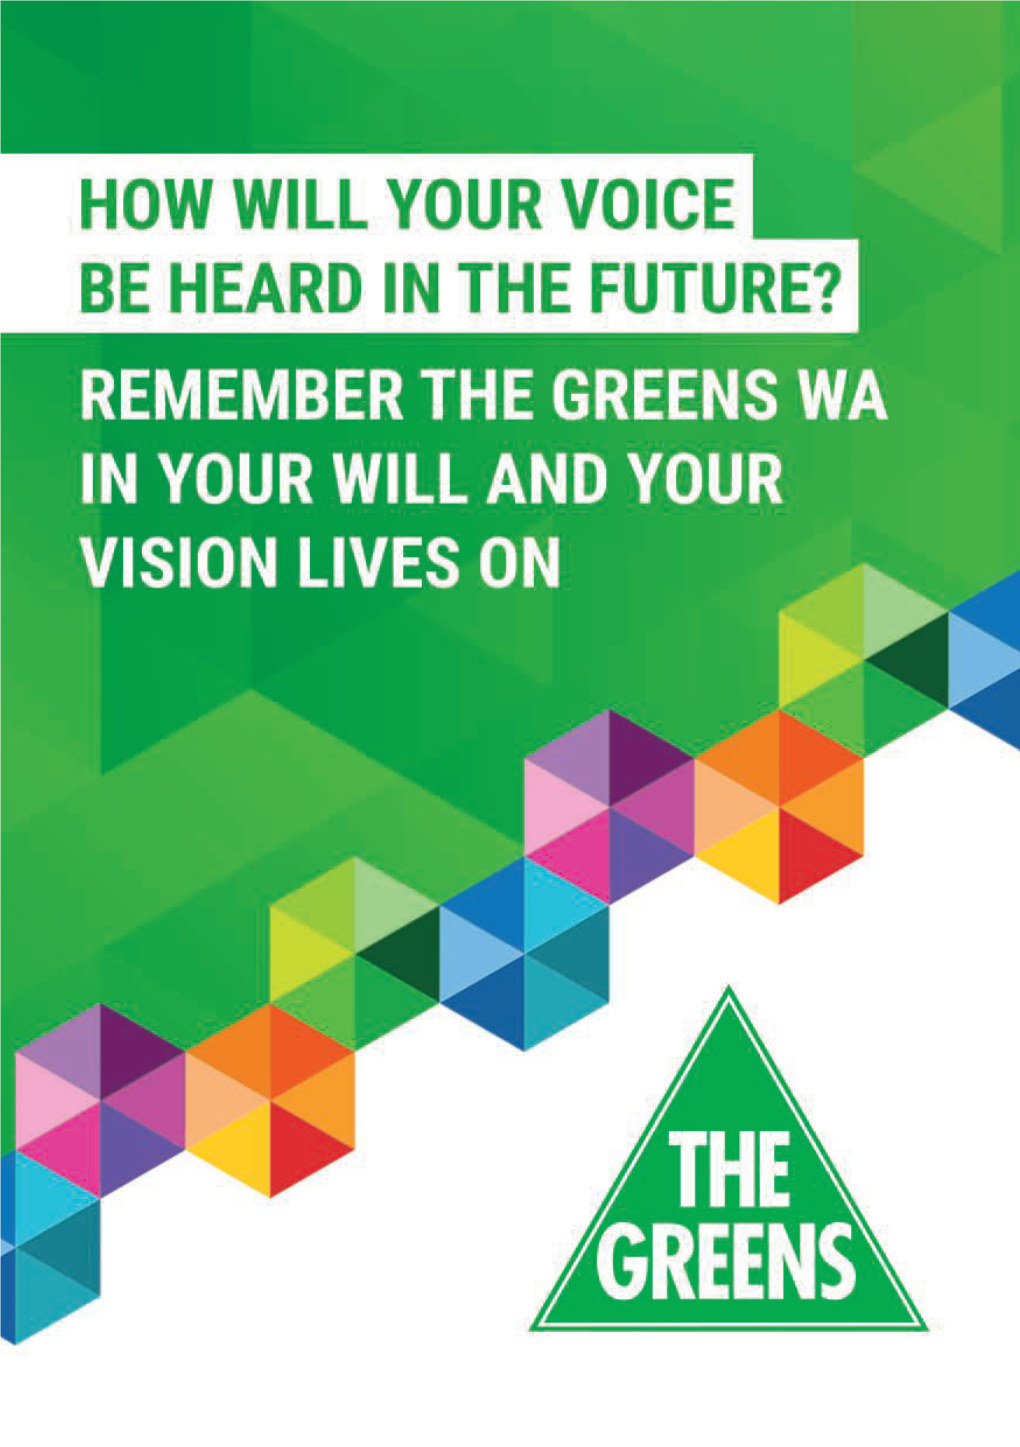 Your Bequest to the Greens Will Ensure That a Brighter Future Will Be Left for a New Generation